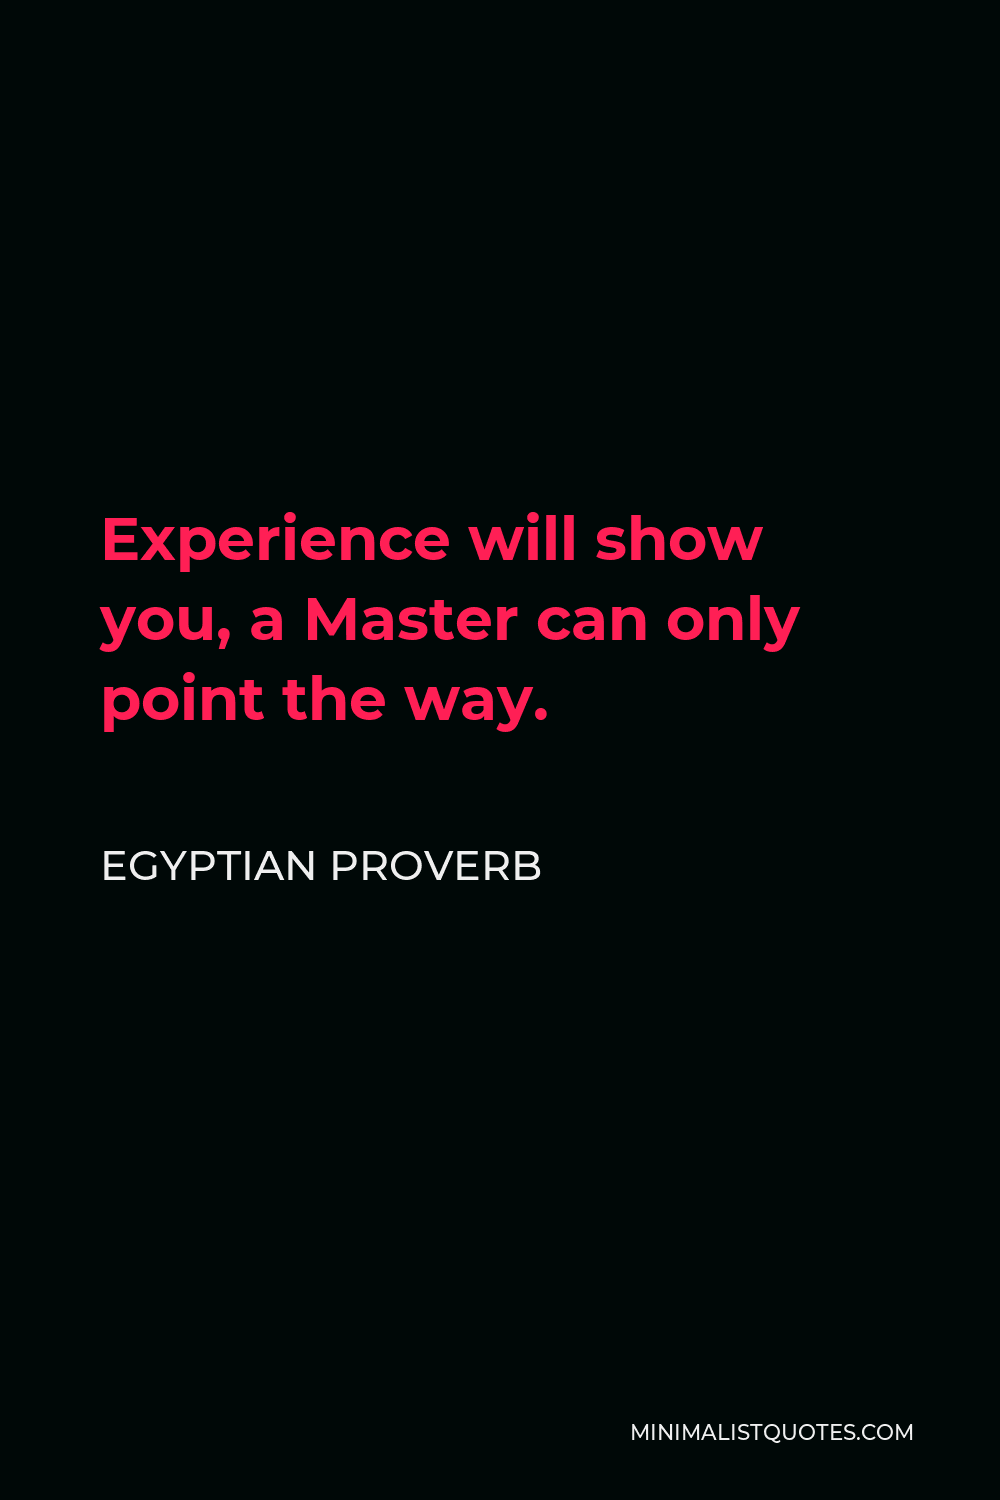 Egyptian Proverb Quote - Experience will show you, a Master can only point the way.